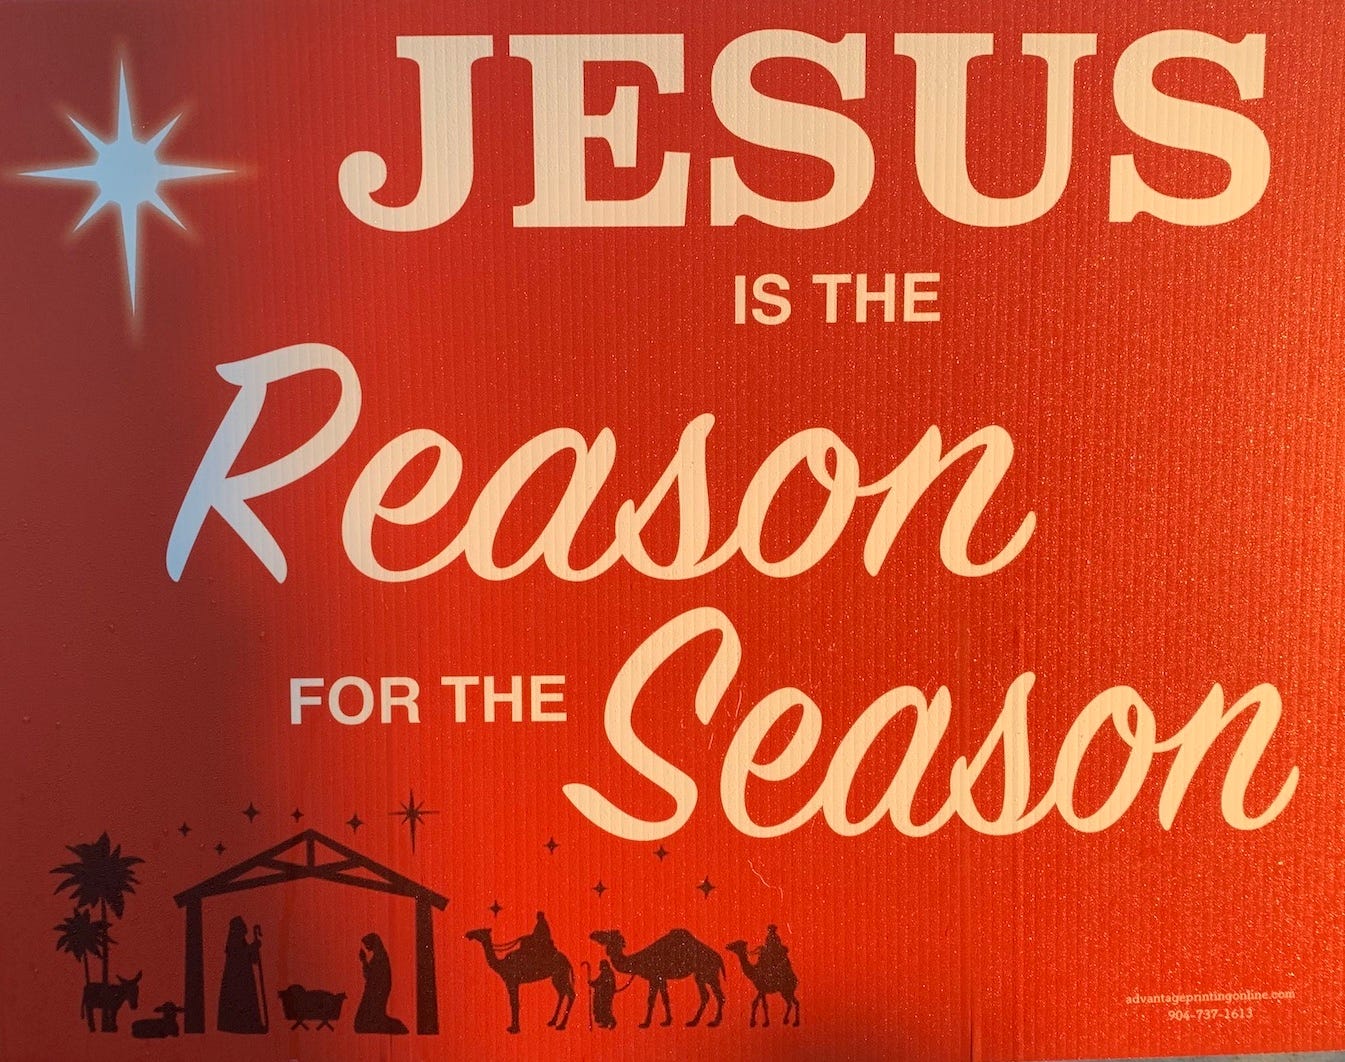 Why Jesus Is the Reason for the Season